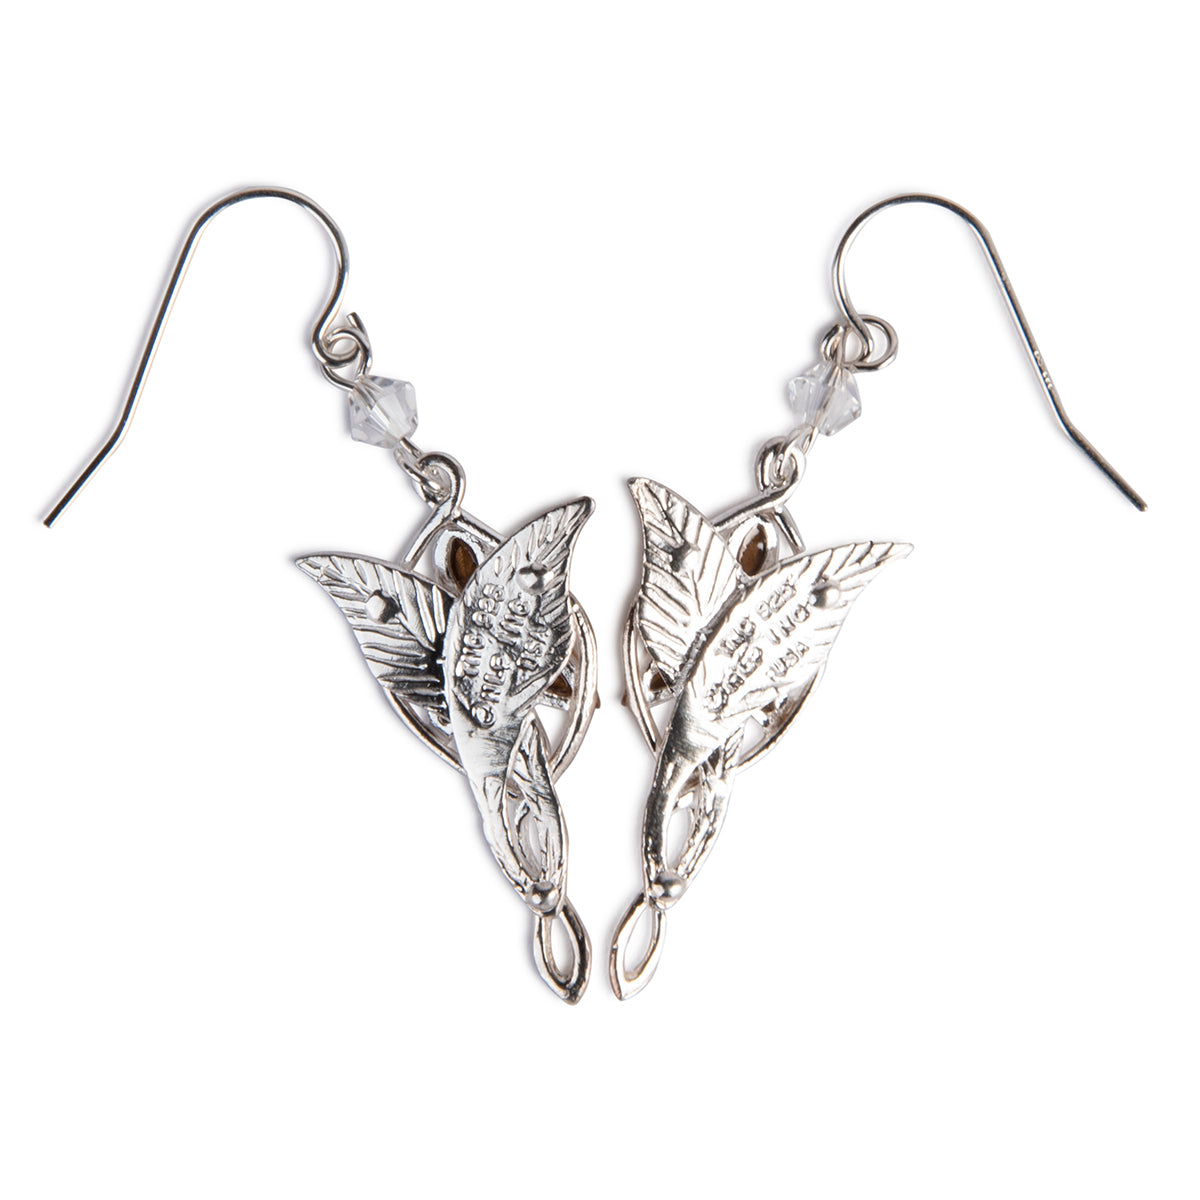 The Lord of the Rings The Arwen Evenstar Earrings